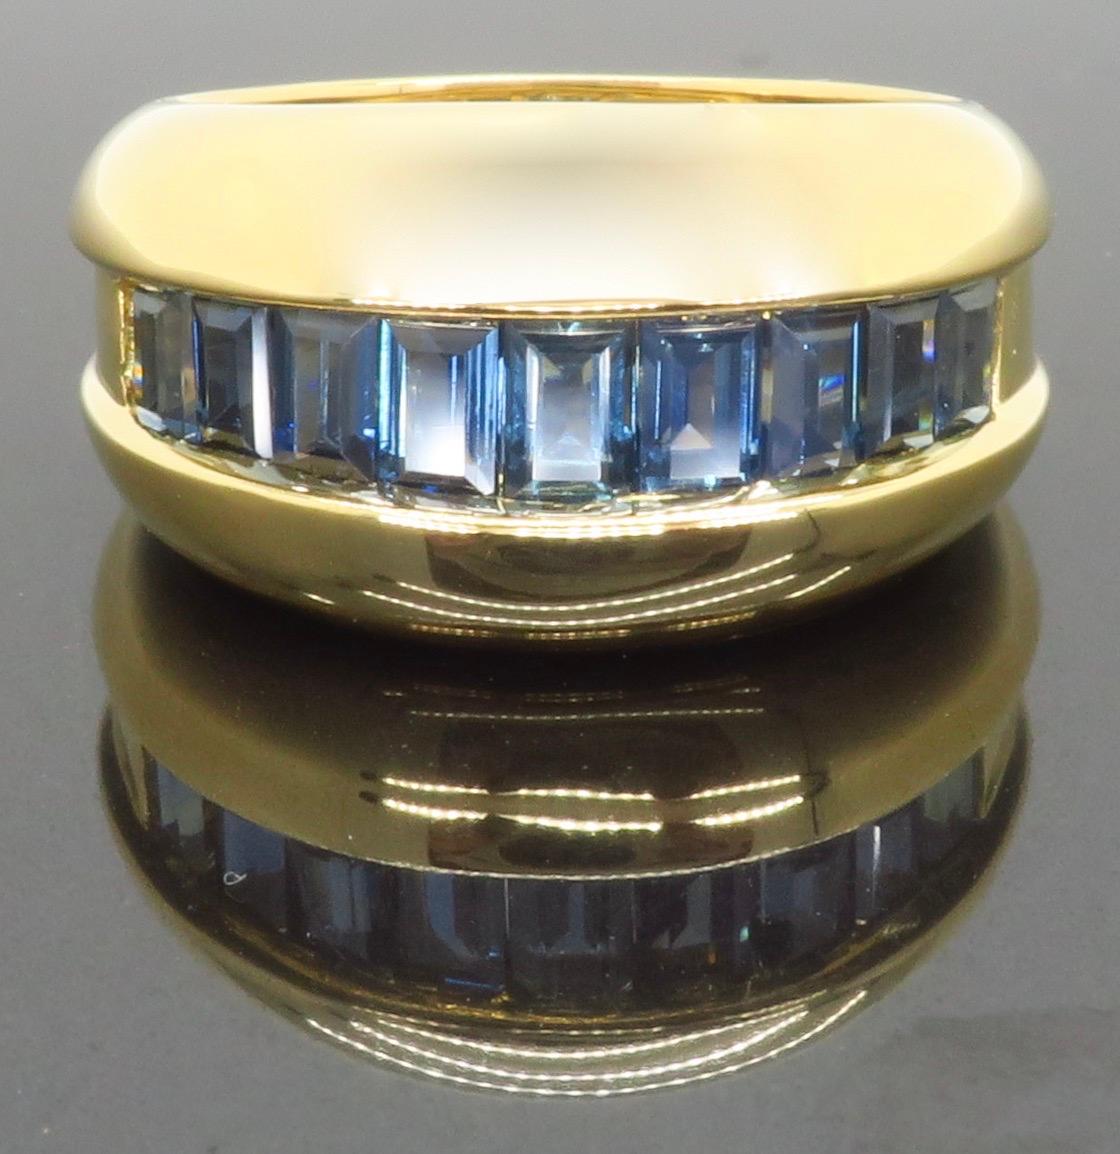 Vintage numbered Cartier Blue Sapphire dome ring made in 18k yellow gold. 

Designer: Cartier
Gemstone:  Blue Sapphire    
Gemstone Carat Weight: Approximately 2.00ctw
Metal: 18K Yellow Gold
Marked/Tested: Stamped  “Cartier” 